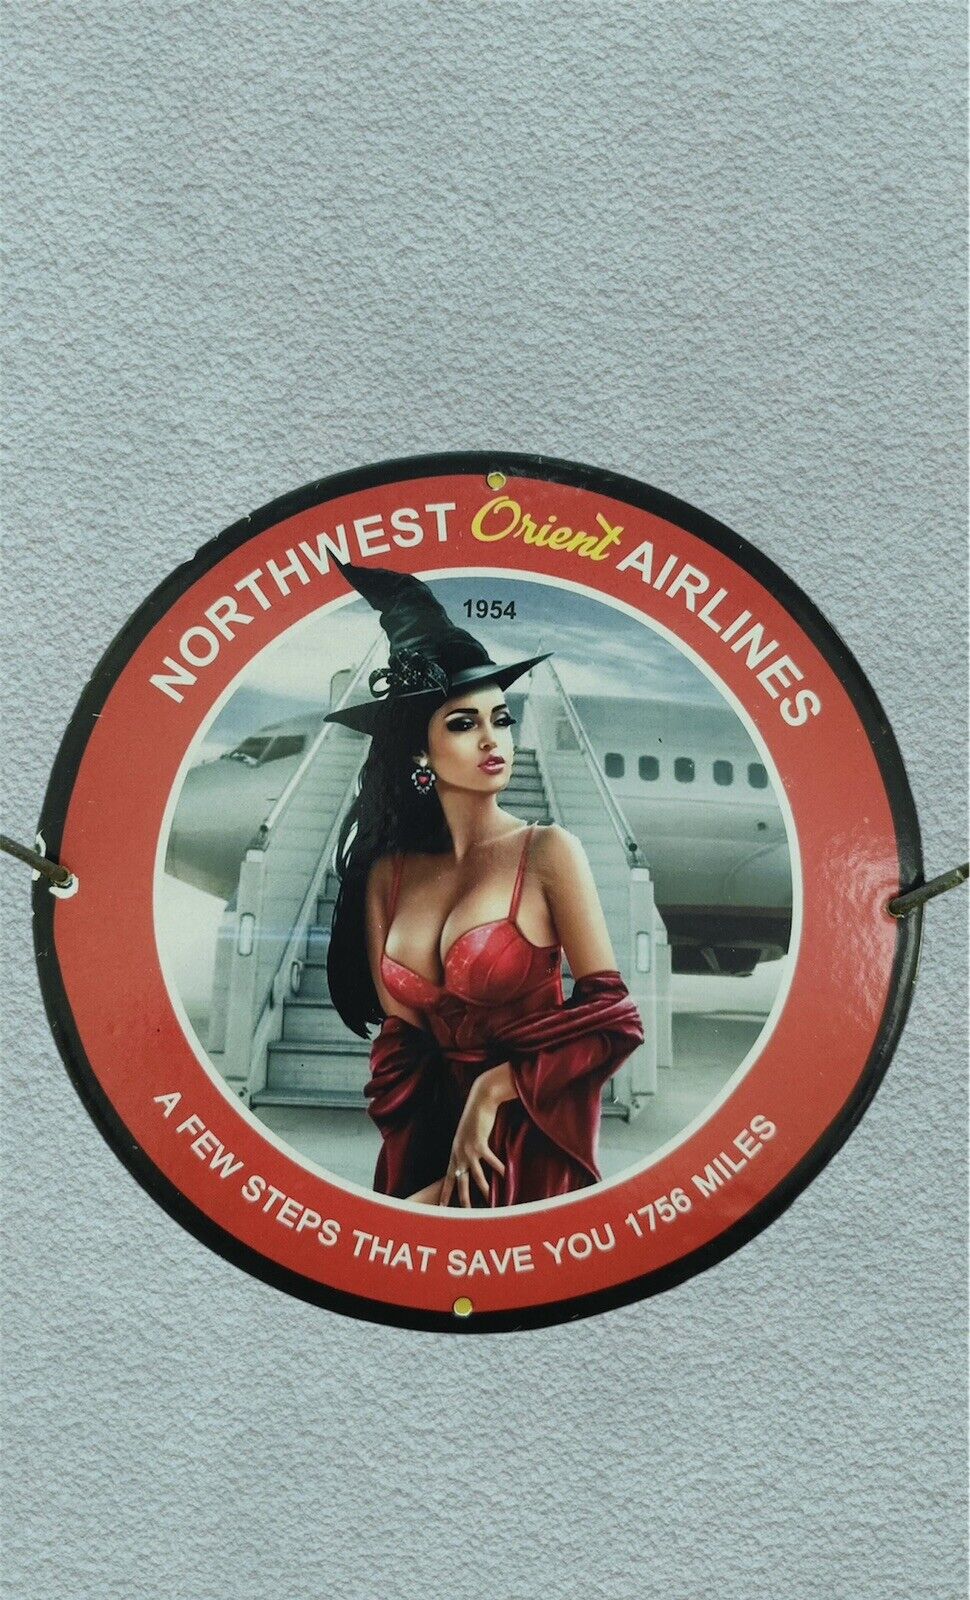 RARE NORTHWEST ORIENT AIRLINES PINUP GIRL PORCELAIN GAS OIL AVIATION PUMP SIGN